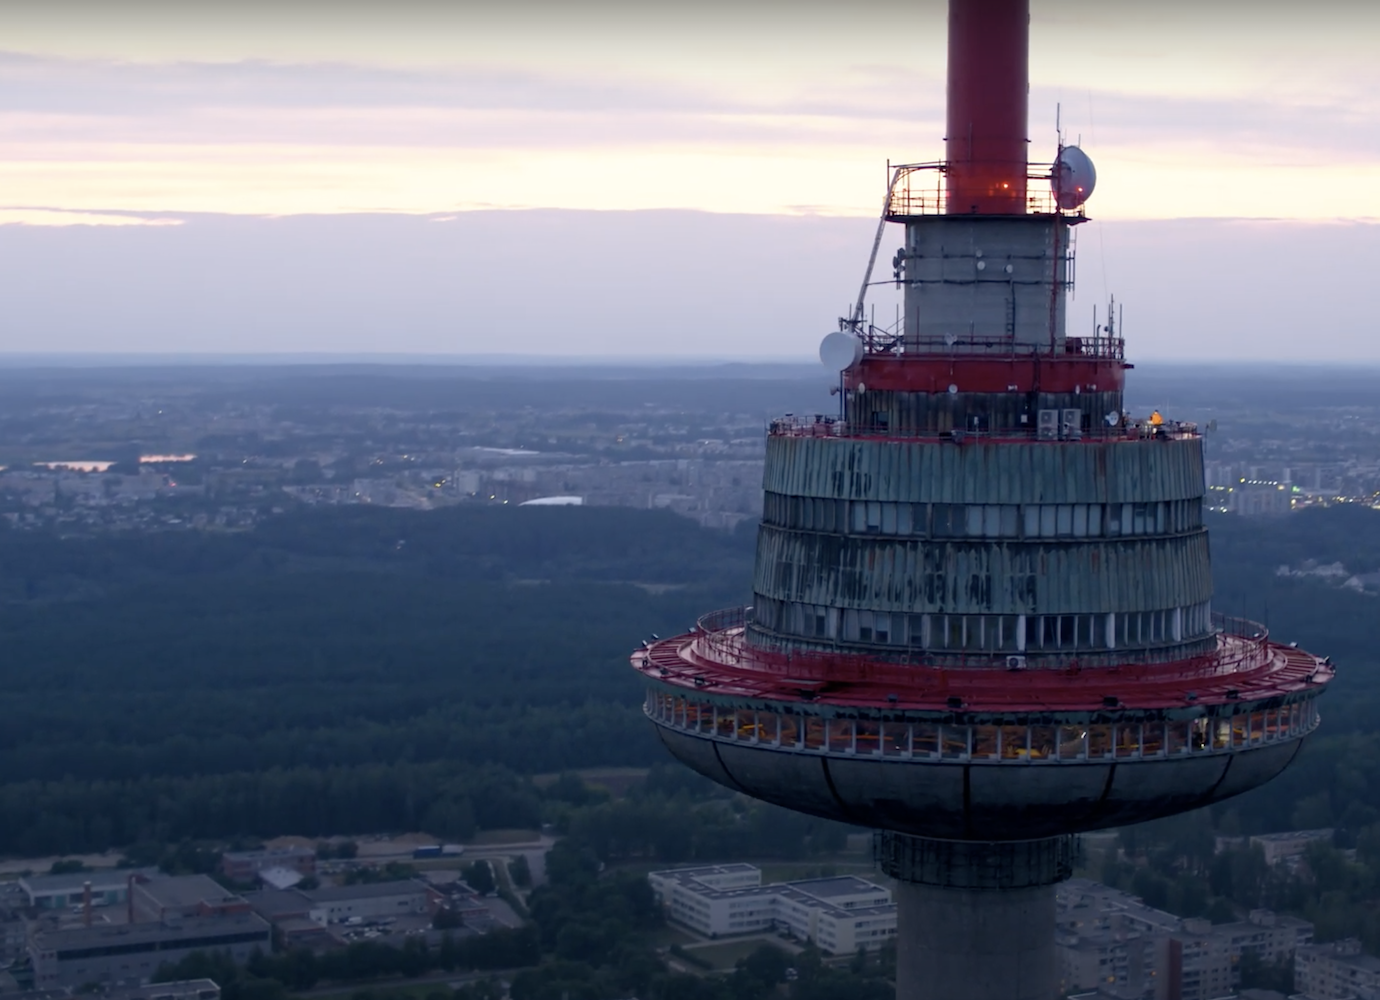 See Vilnius from the top of its tallest tower in this electronic music video